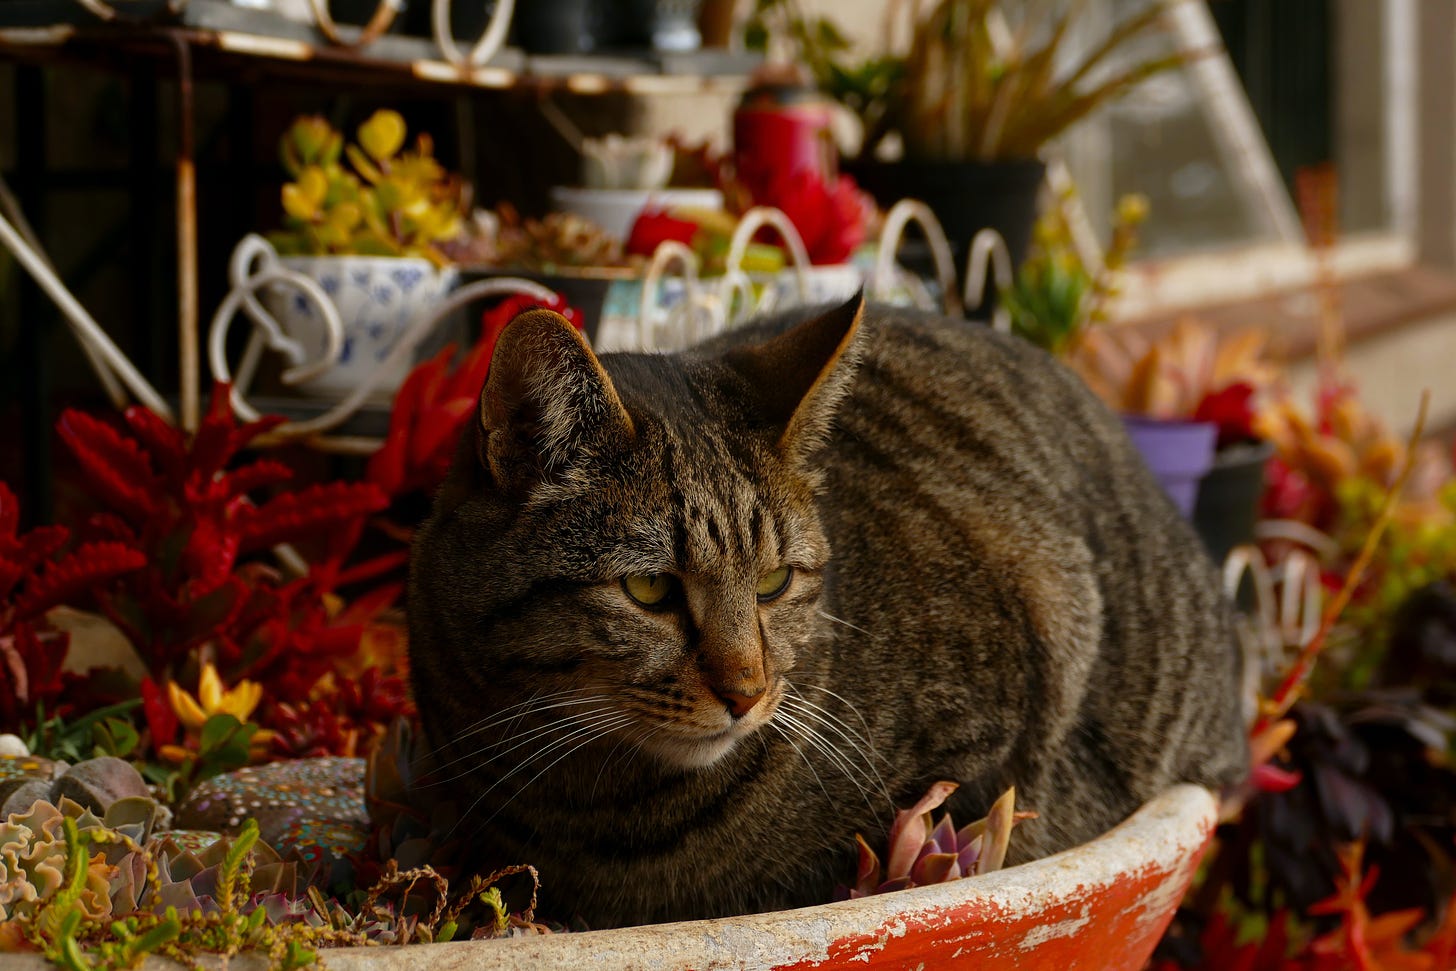 A grey tabby sitting loaf-style in a large outdoor planter